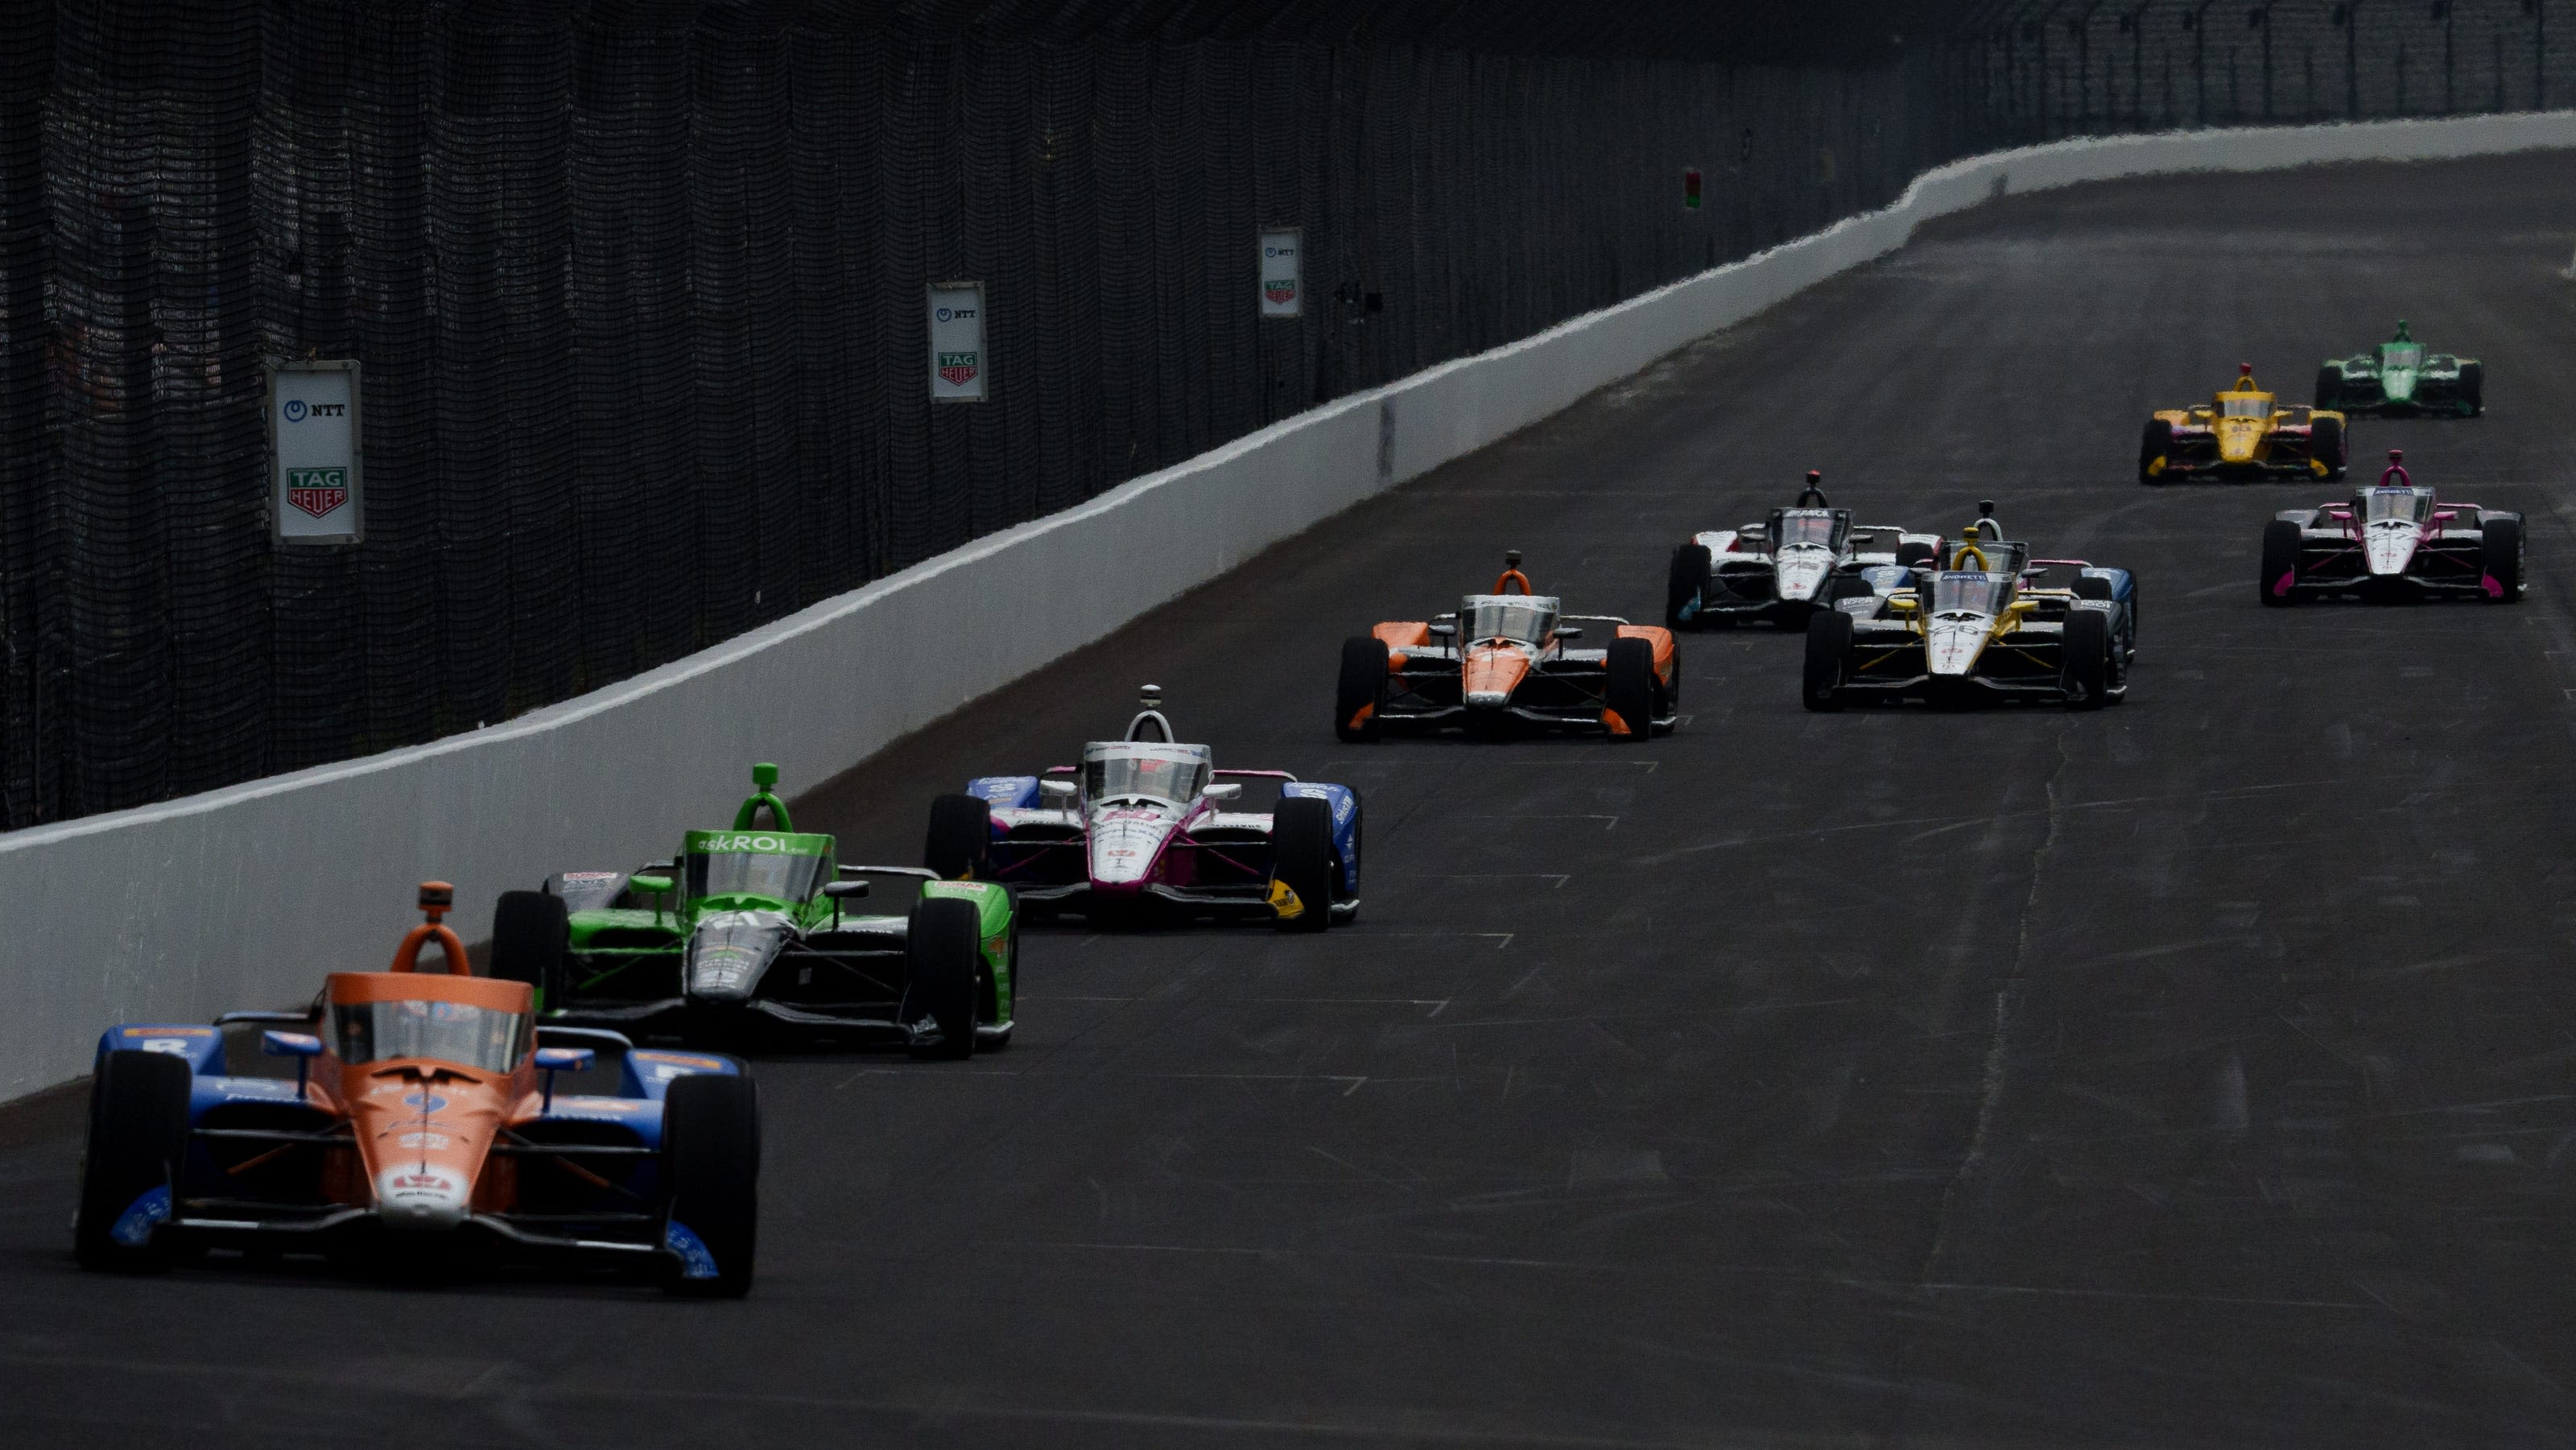 LIVE: Indianapolis 500 practice updates, speeds, crashes on Fast Friday